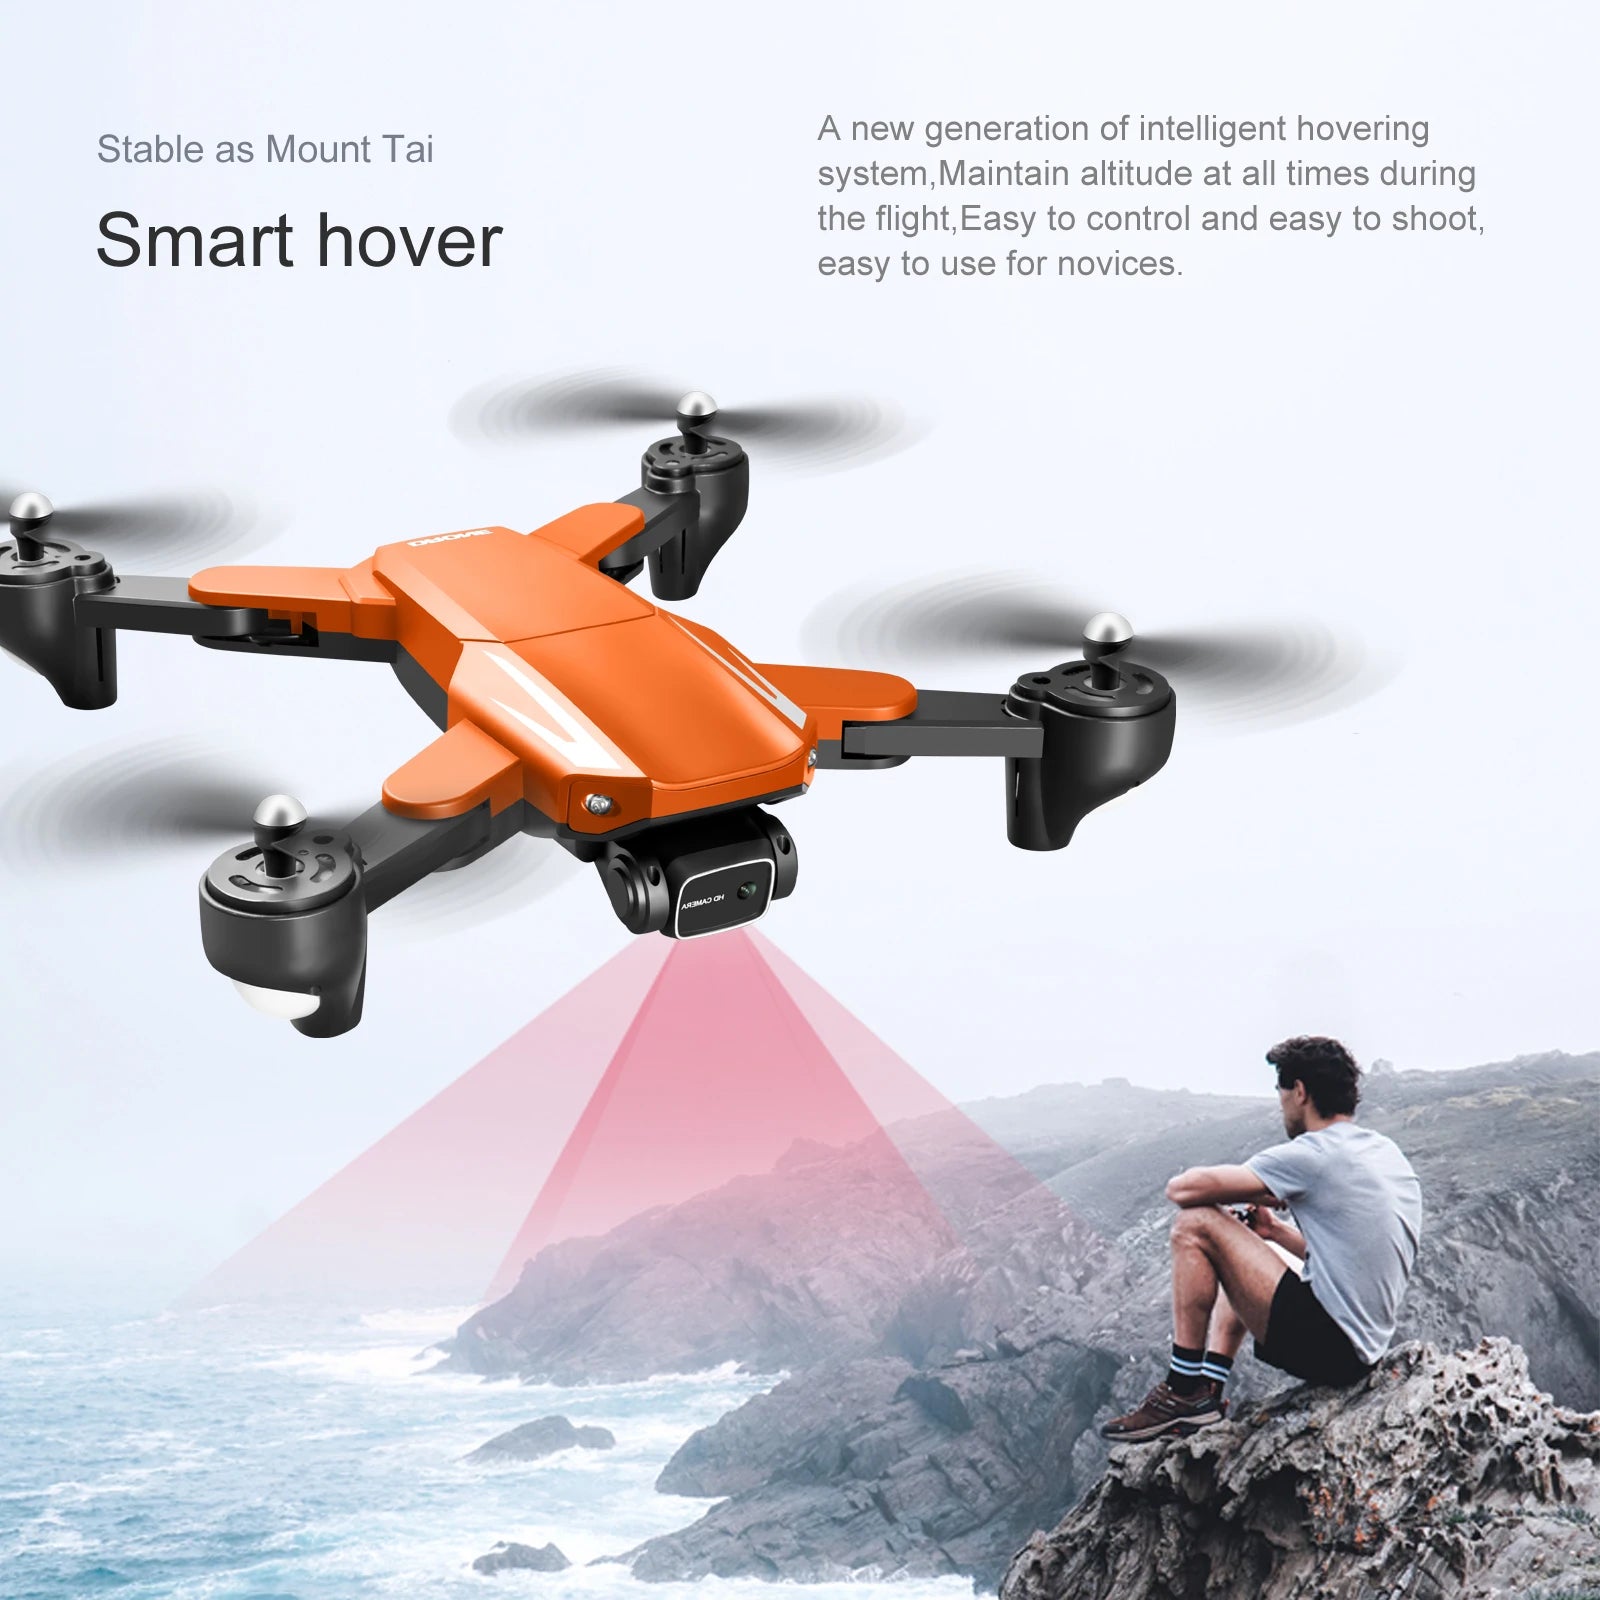 S93 Drone, new generation of intelligent hovering stable as mount tai system